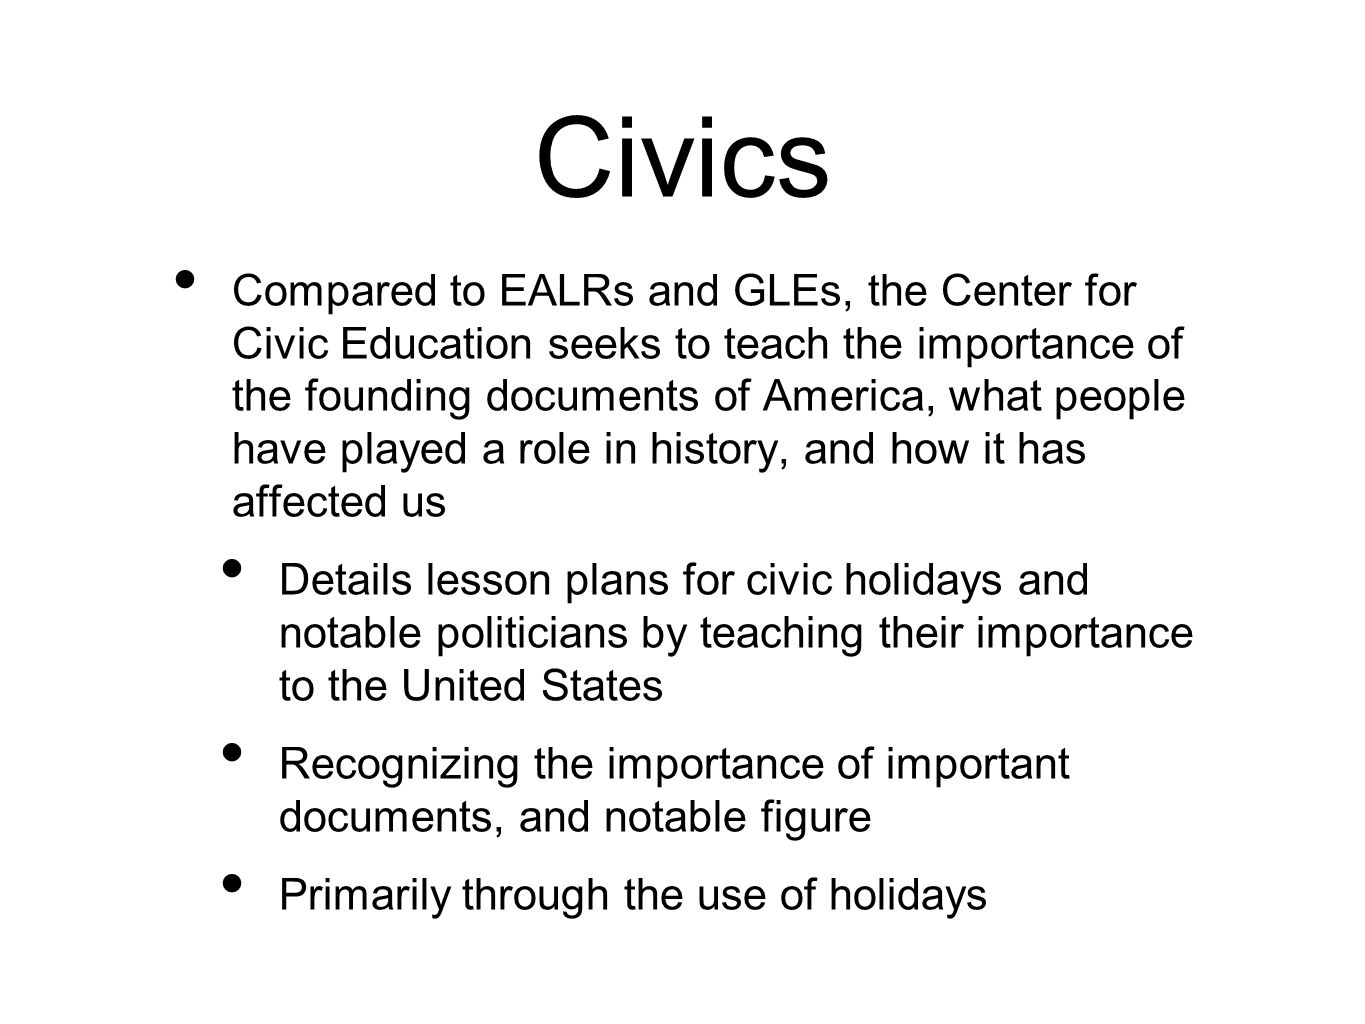 Civics Compared to EALRs and GLEs, the Center for Civic Education seeks to teach the importance of the founding documents of America, what people have played a role in history, and how it has affected us Details lesson plans for civic holidays and notable politicians by teaching their importance to the United States Recognizing the importance of important documents, and notable figure Primarily through the use of holidays